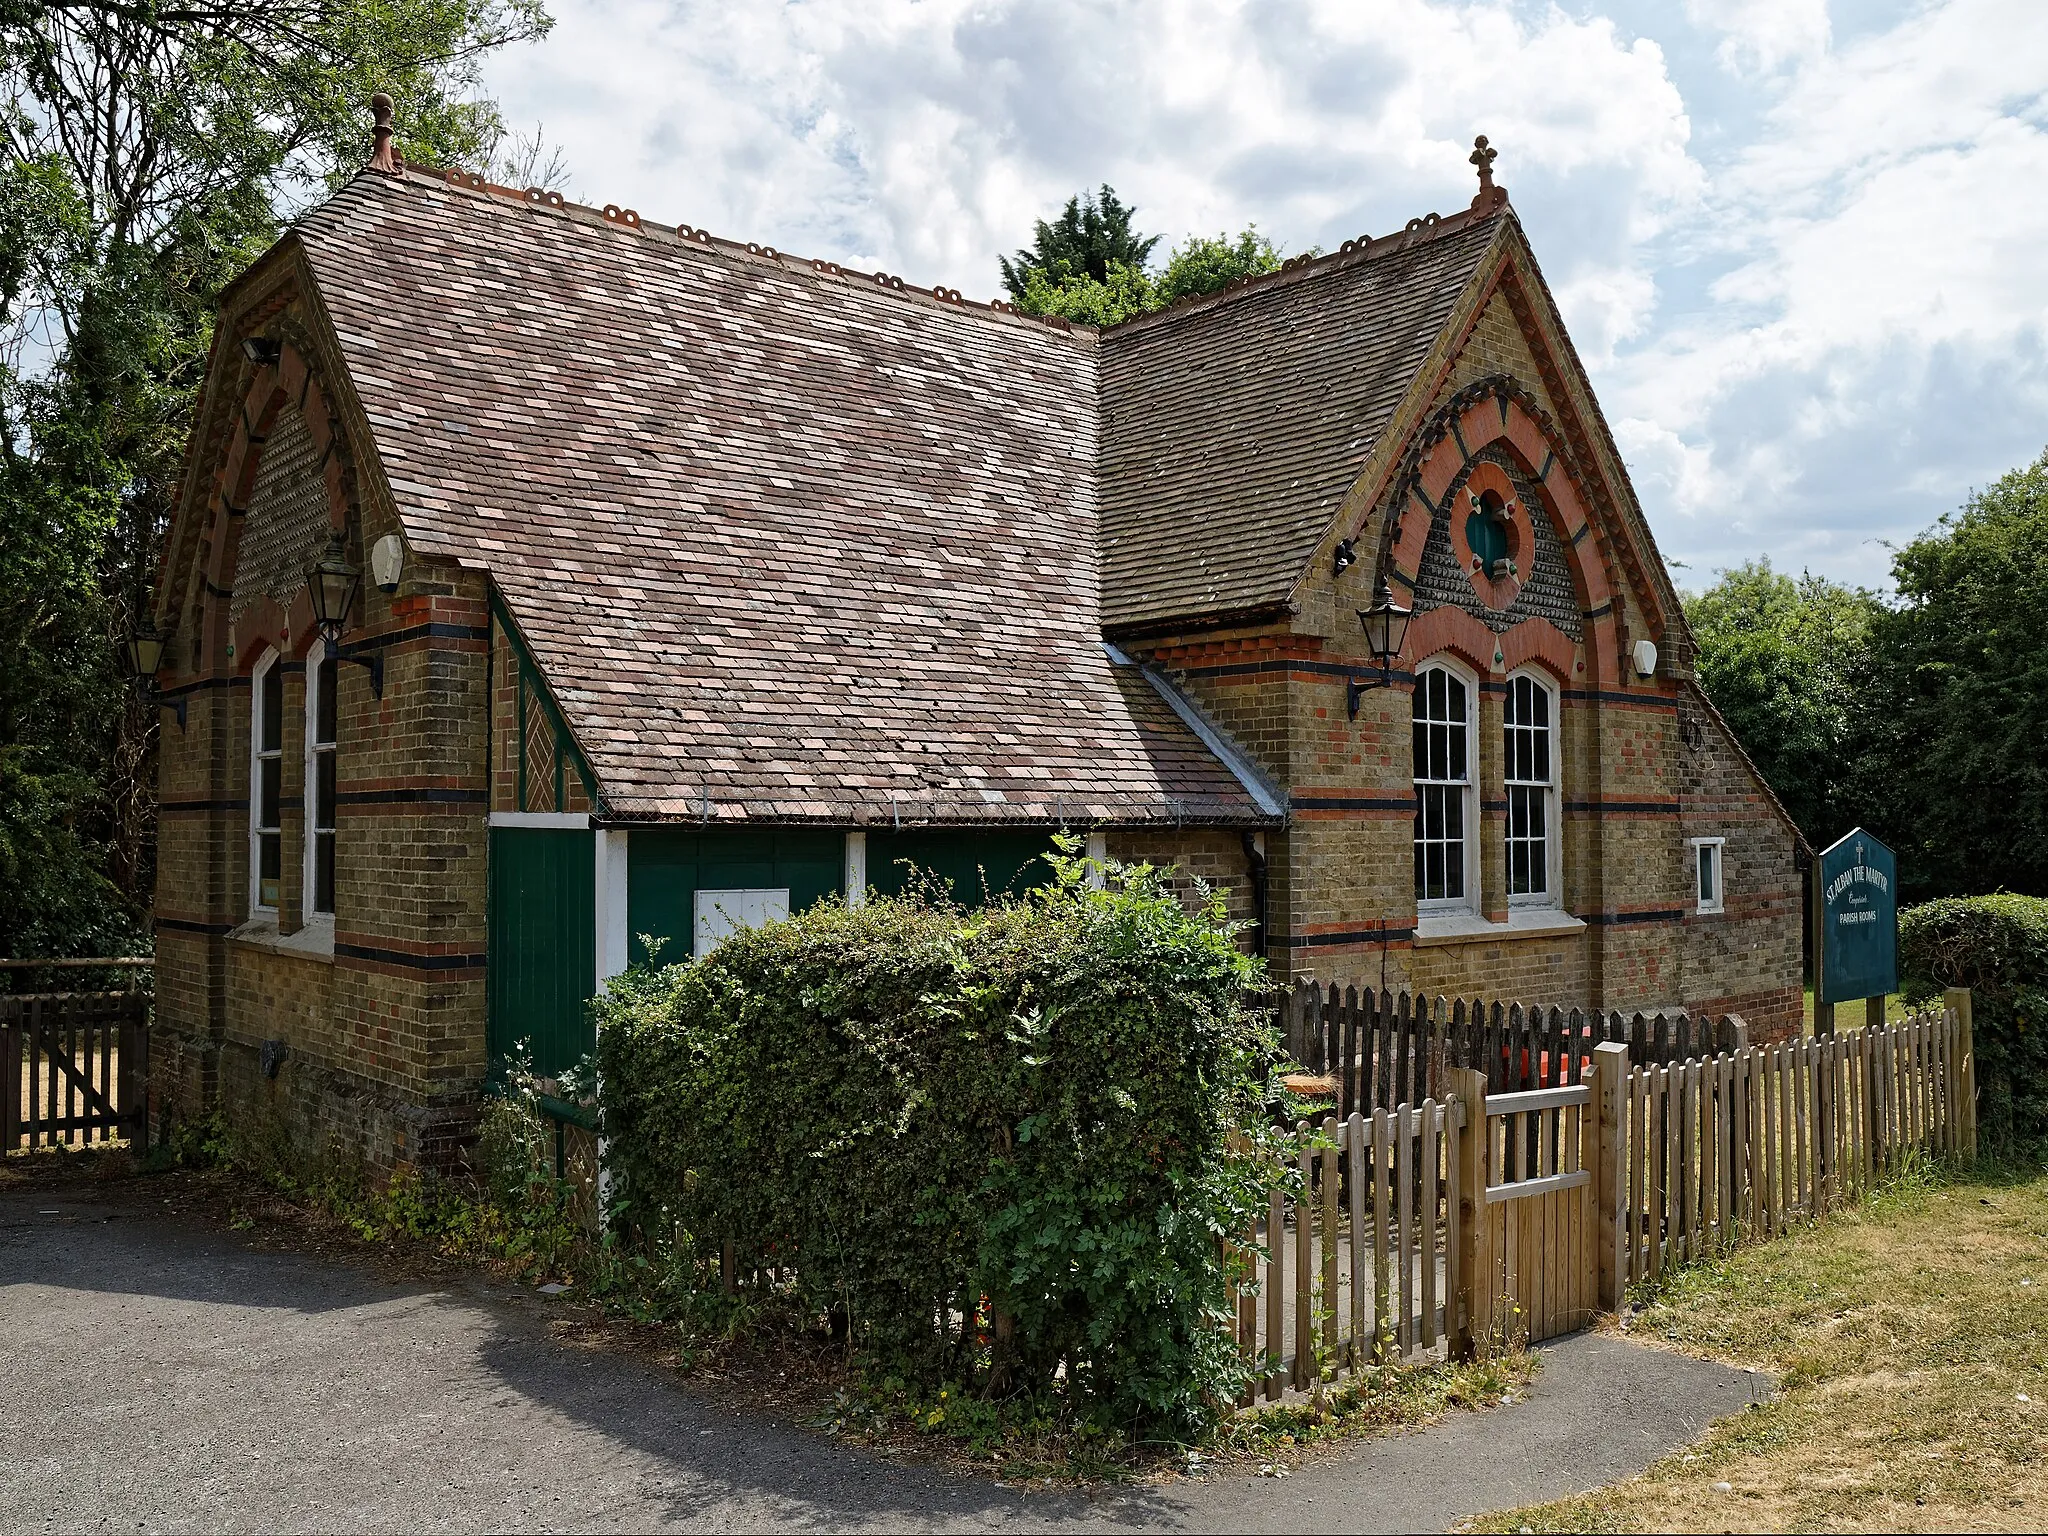 Photo showing: The Grade II listed 1882 parish rooms church hall originally built to accommodate a Sunday School for the Church of St Alban the Martyr, at the point where Coopersale Common Road becomes Houblons Hill in Coopersale, in the civil parish of Epping, Essex, England. Camera: Canon EOS 6D Mark II with Canon EF 24-105mm F4L IS USM lens. Software: File lens-corrected, optimized, perhaps cropped, with DxO PhotoLab, and likely further optimized with Adobe Photoshop CS2.